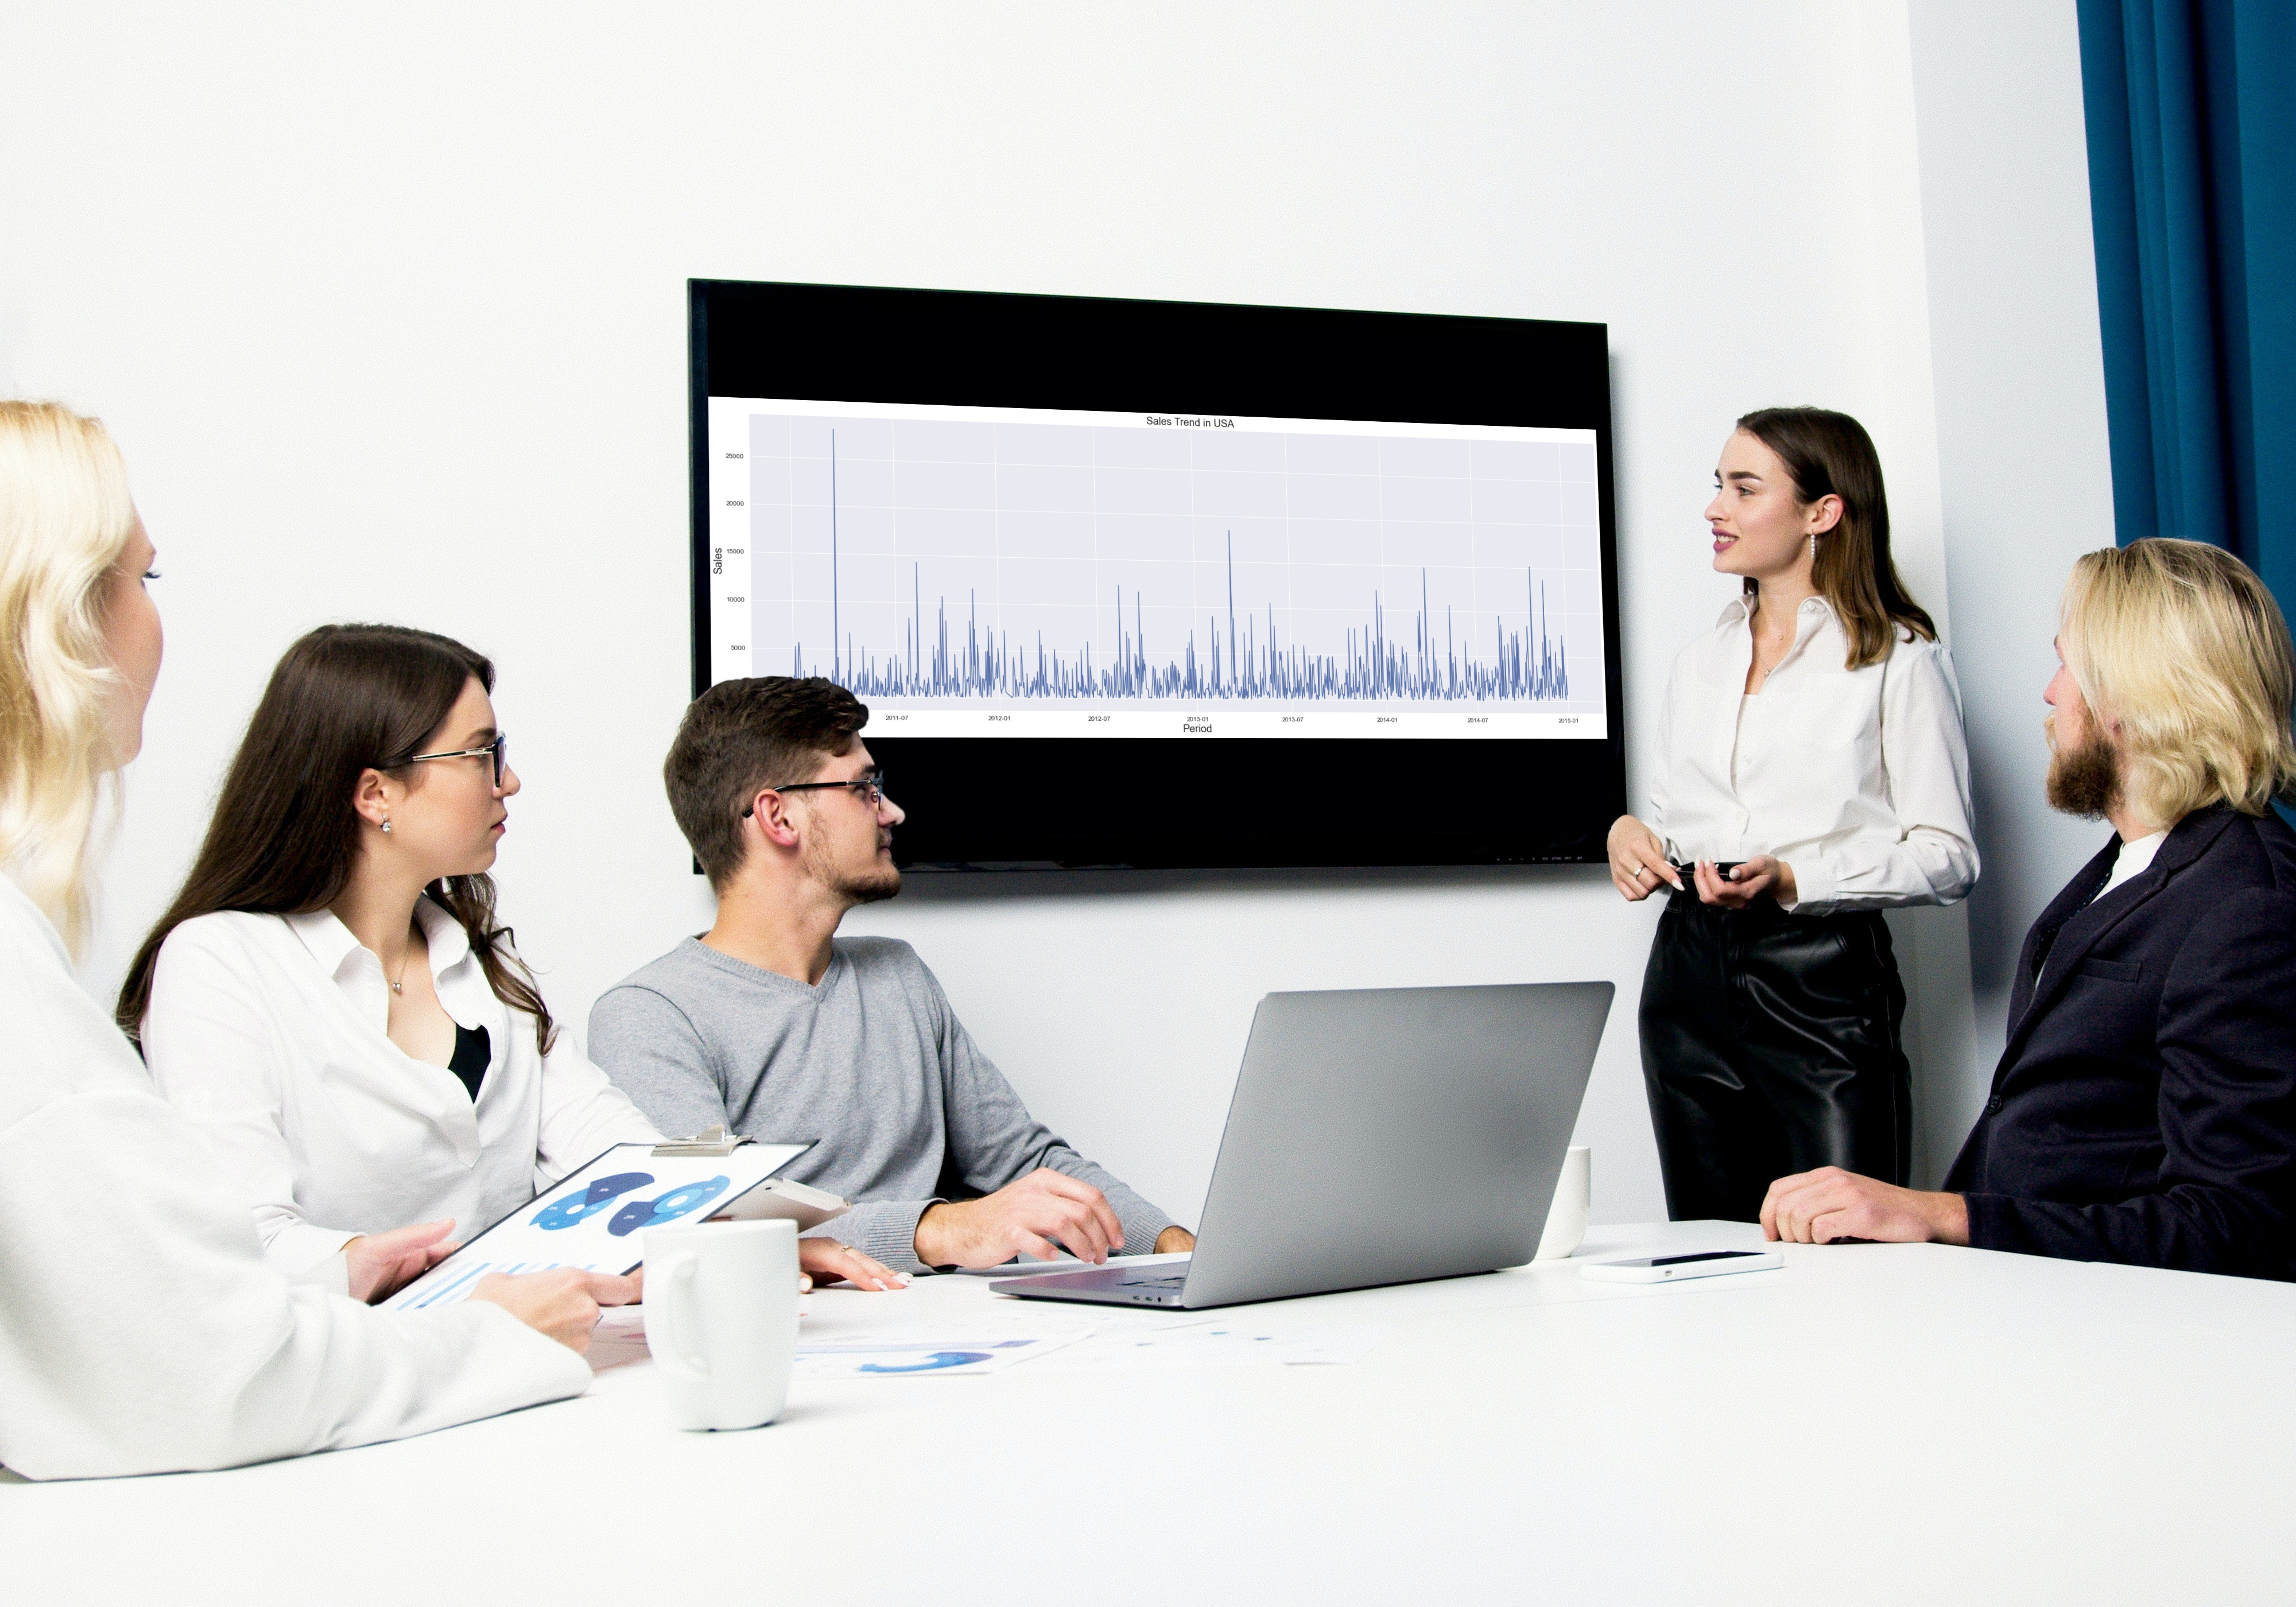 Mockup of data chart on a TV screen during a meeting